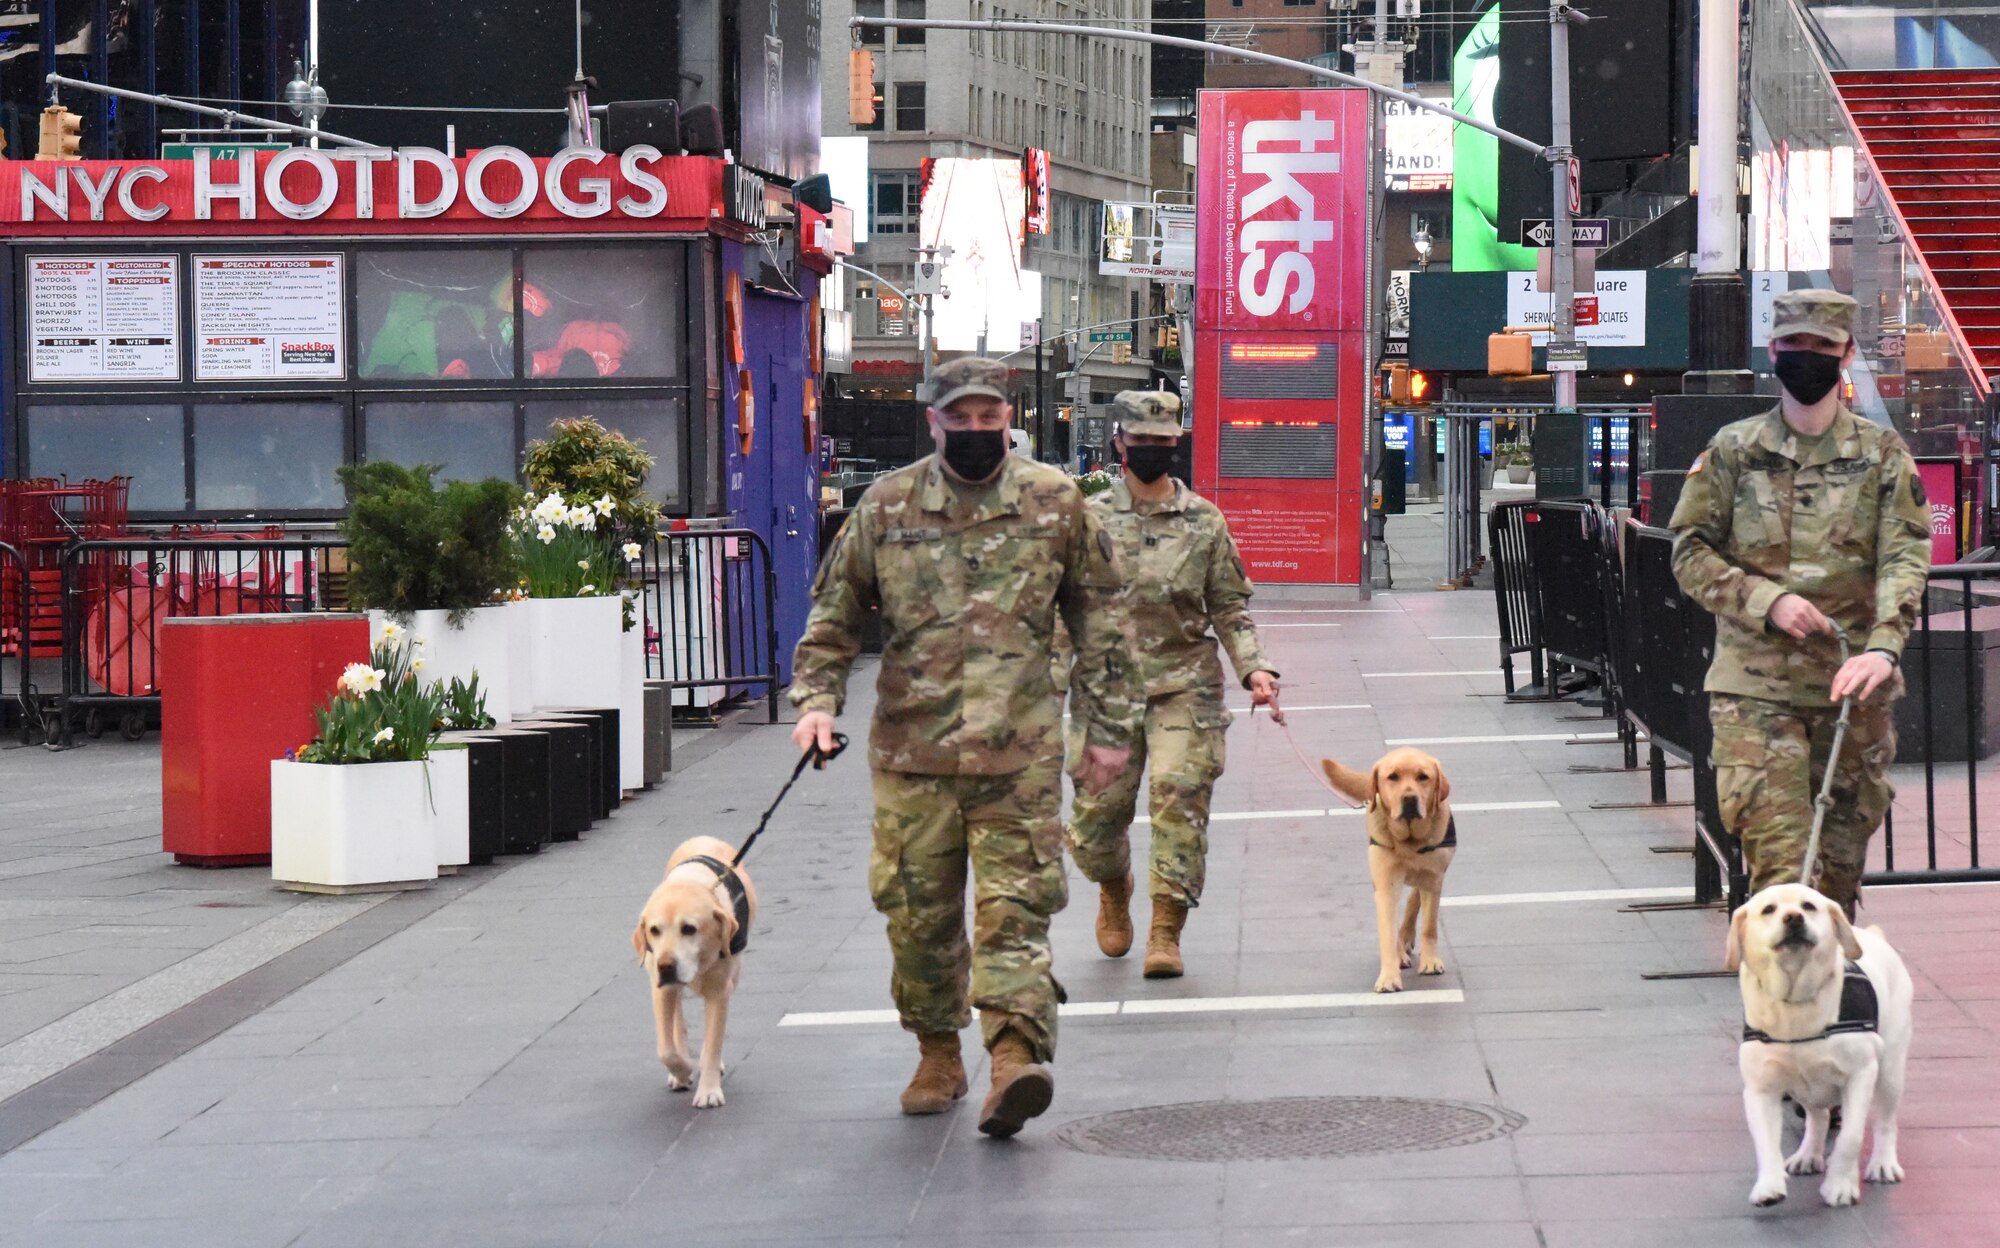 Members of the New York Army National Guard walk in Times Square with Labrador retriever service dogs provided by Puppies Behind Bars April 23, 2020. Puppies Behind Bars is a nonprofit organization that trains prison inmates to raise service dogs for wounded war veterans and first responders, as well as explosive-detection canines for law enforcement.